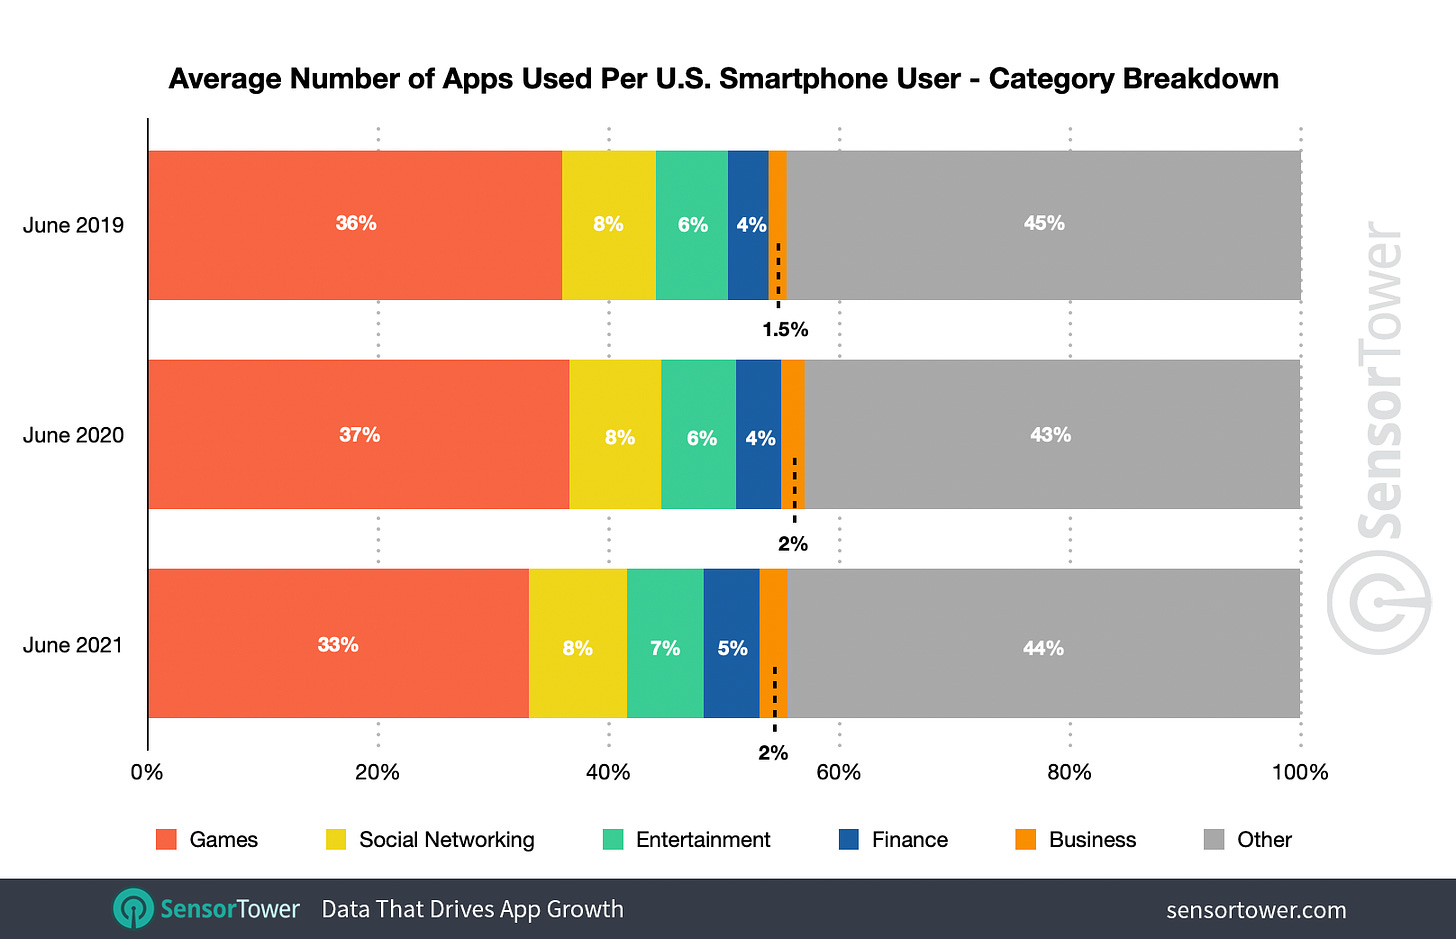 Mobile games are still the most used apps by the average smartphone owner